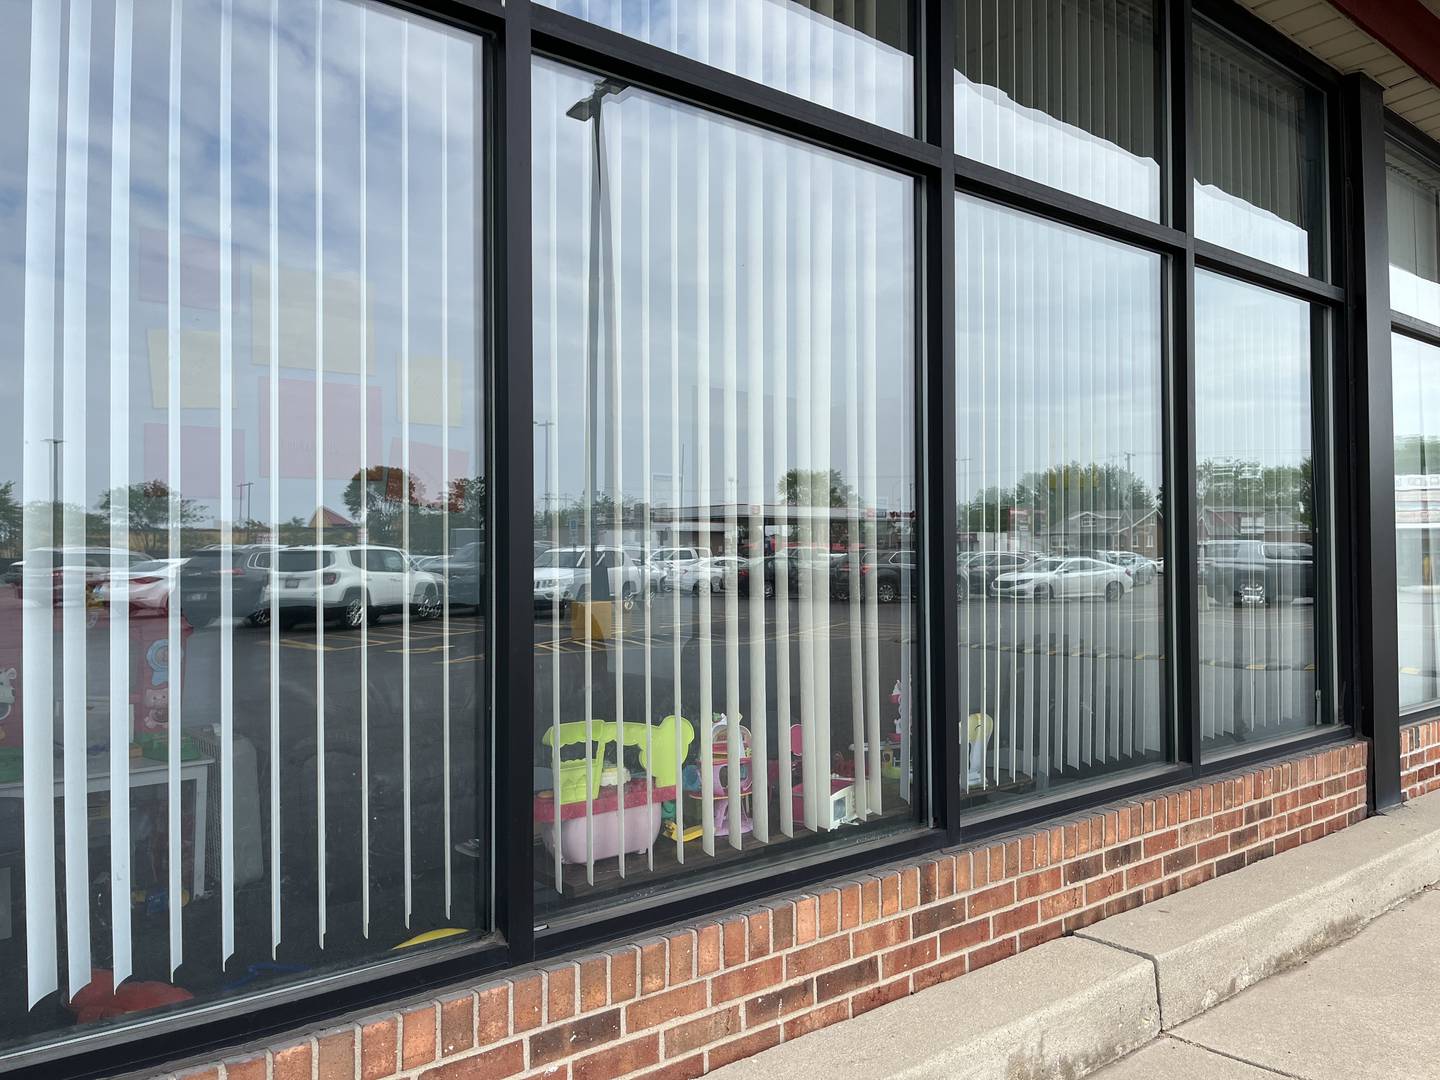 A window to the Joliet office for the Illinois Department of Human Services, 1619 W. Jefferson St., seen on Tuesday, May 24, 2022. A shooting reported on Saturday, May 21, 2022, caused damage to the windows to the building.